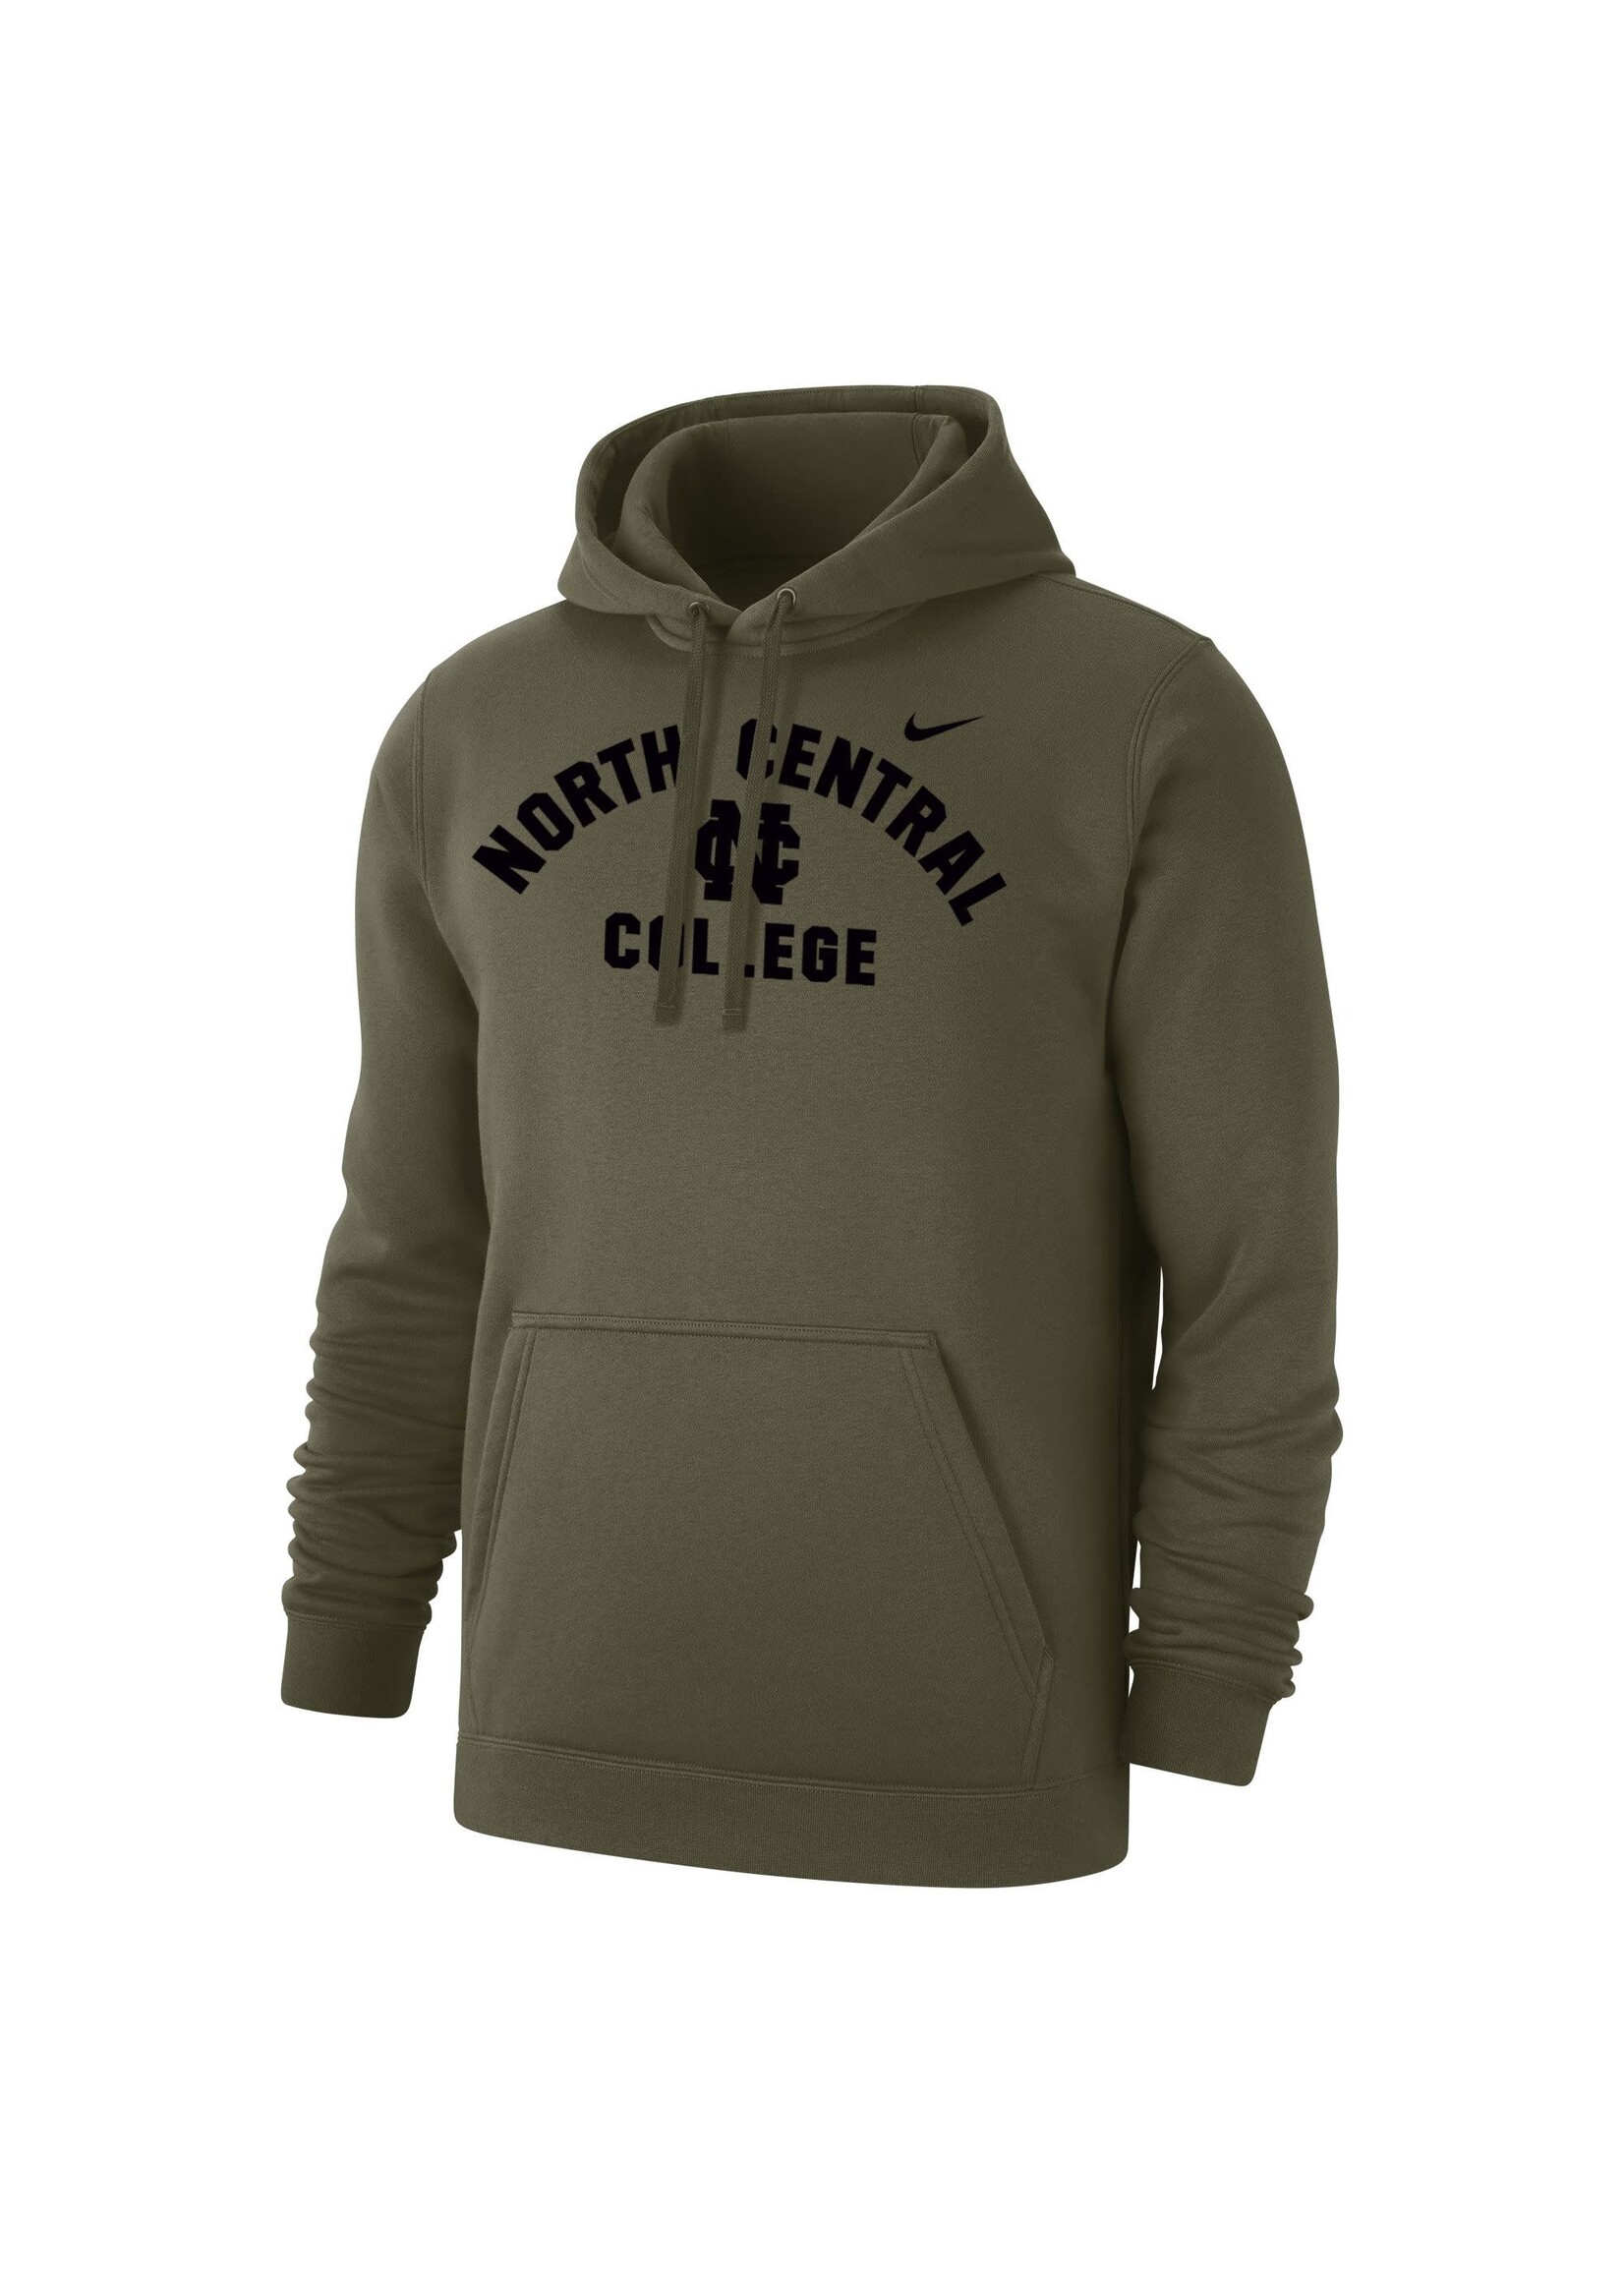 Nike Club Fleece Hoody Olive Green - North Central College Campus Store